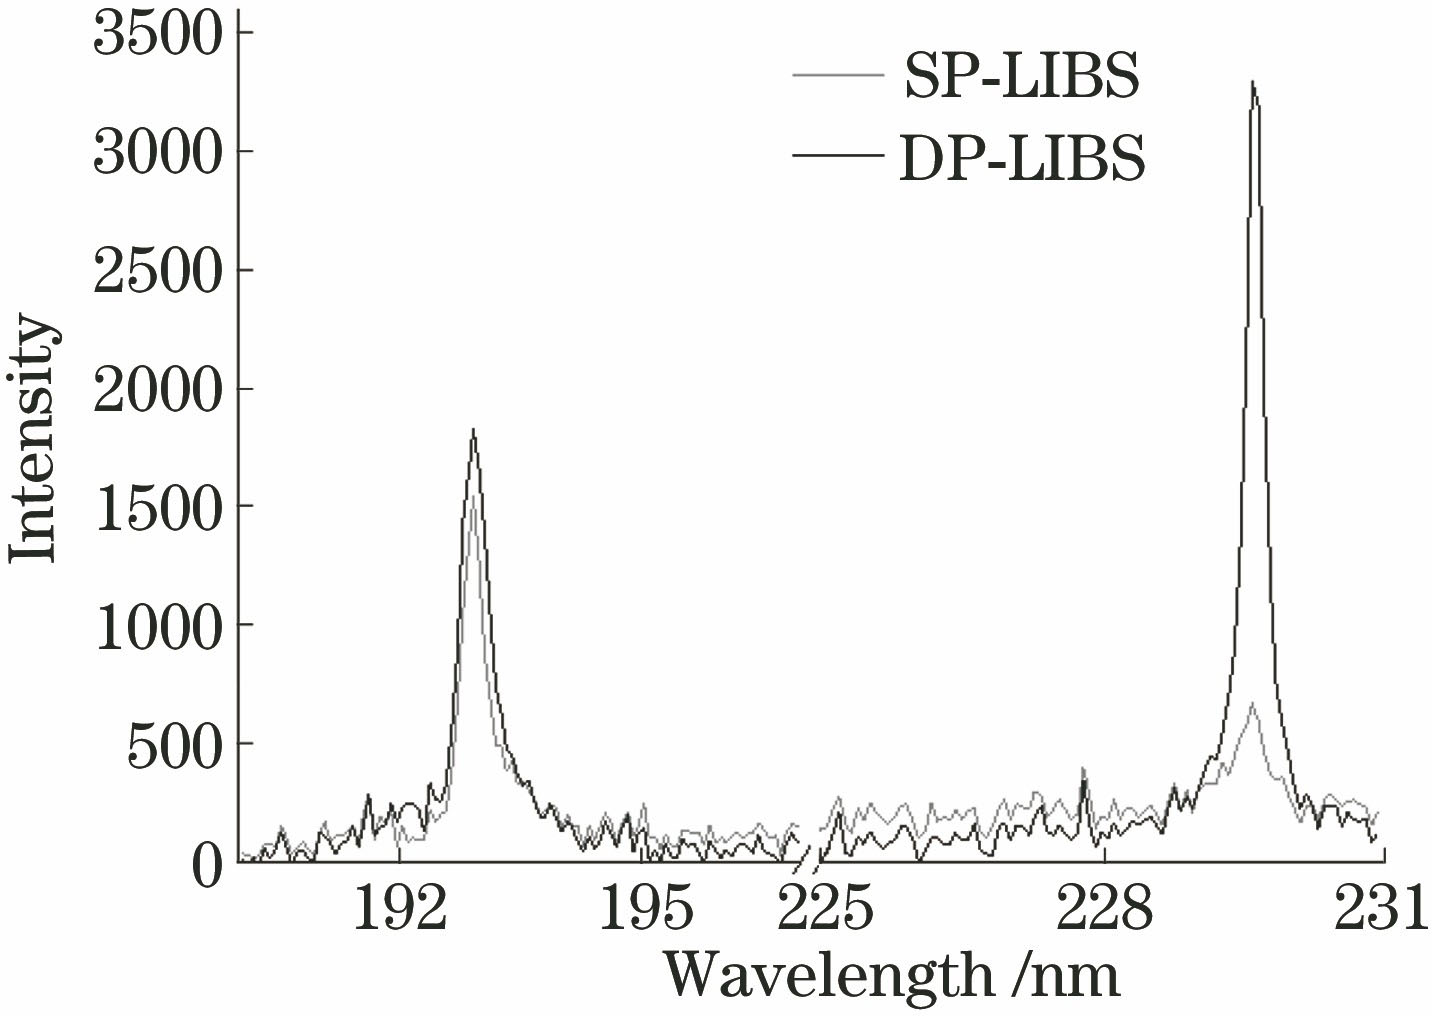 Comparison of C element spectral lines under single and double pulses with energy of 140 mJ